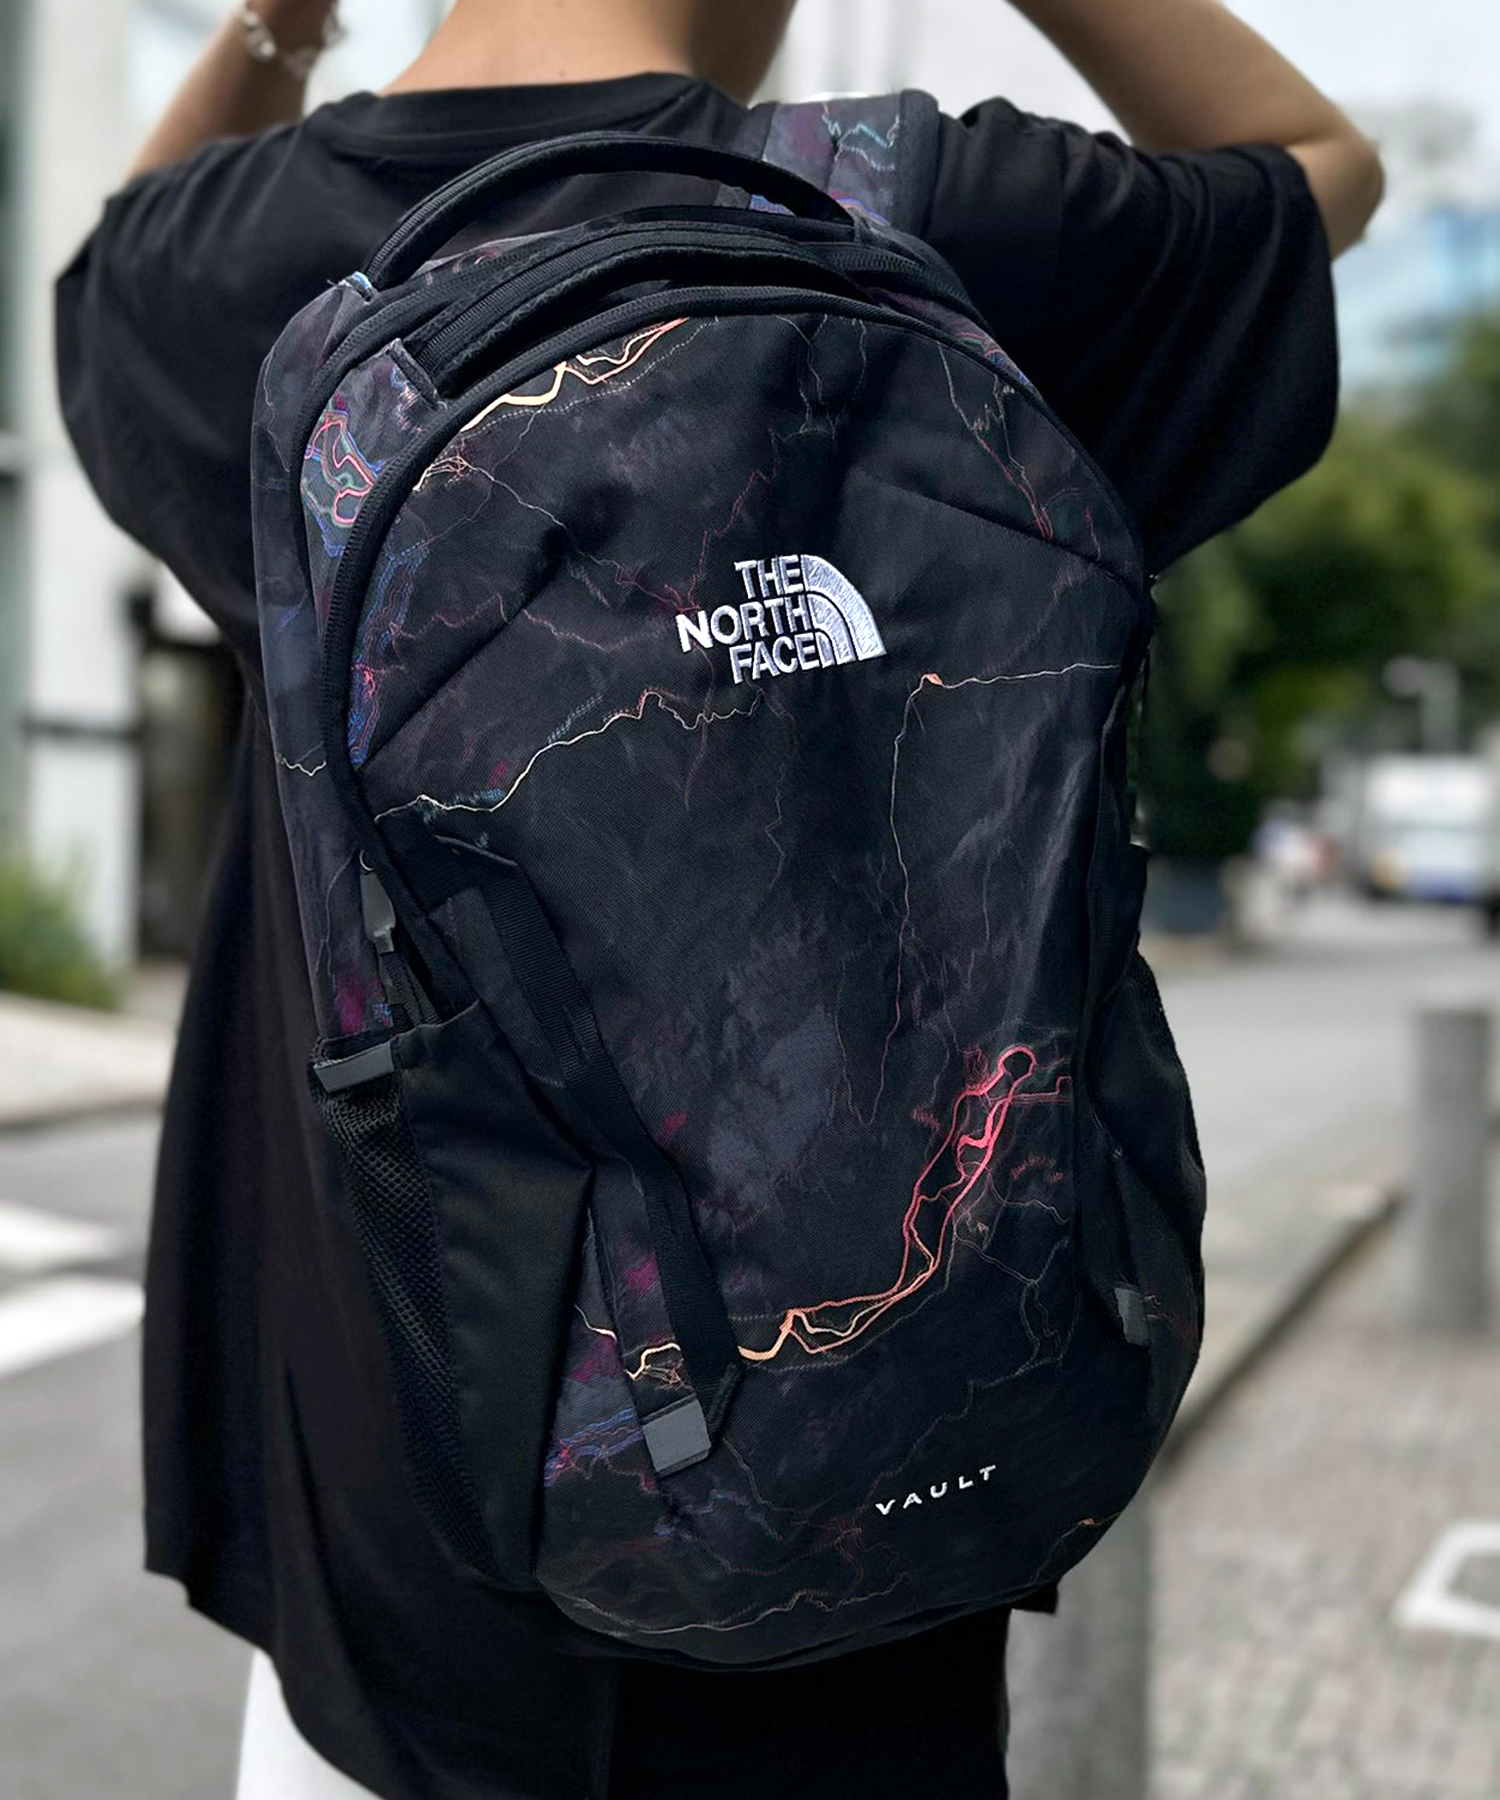 THE NORTH FACE リュックサック ブラック